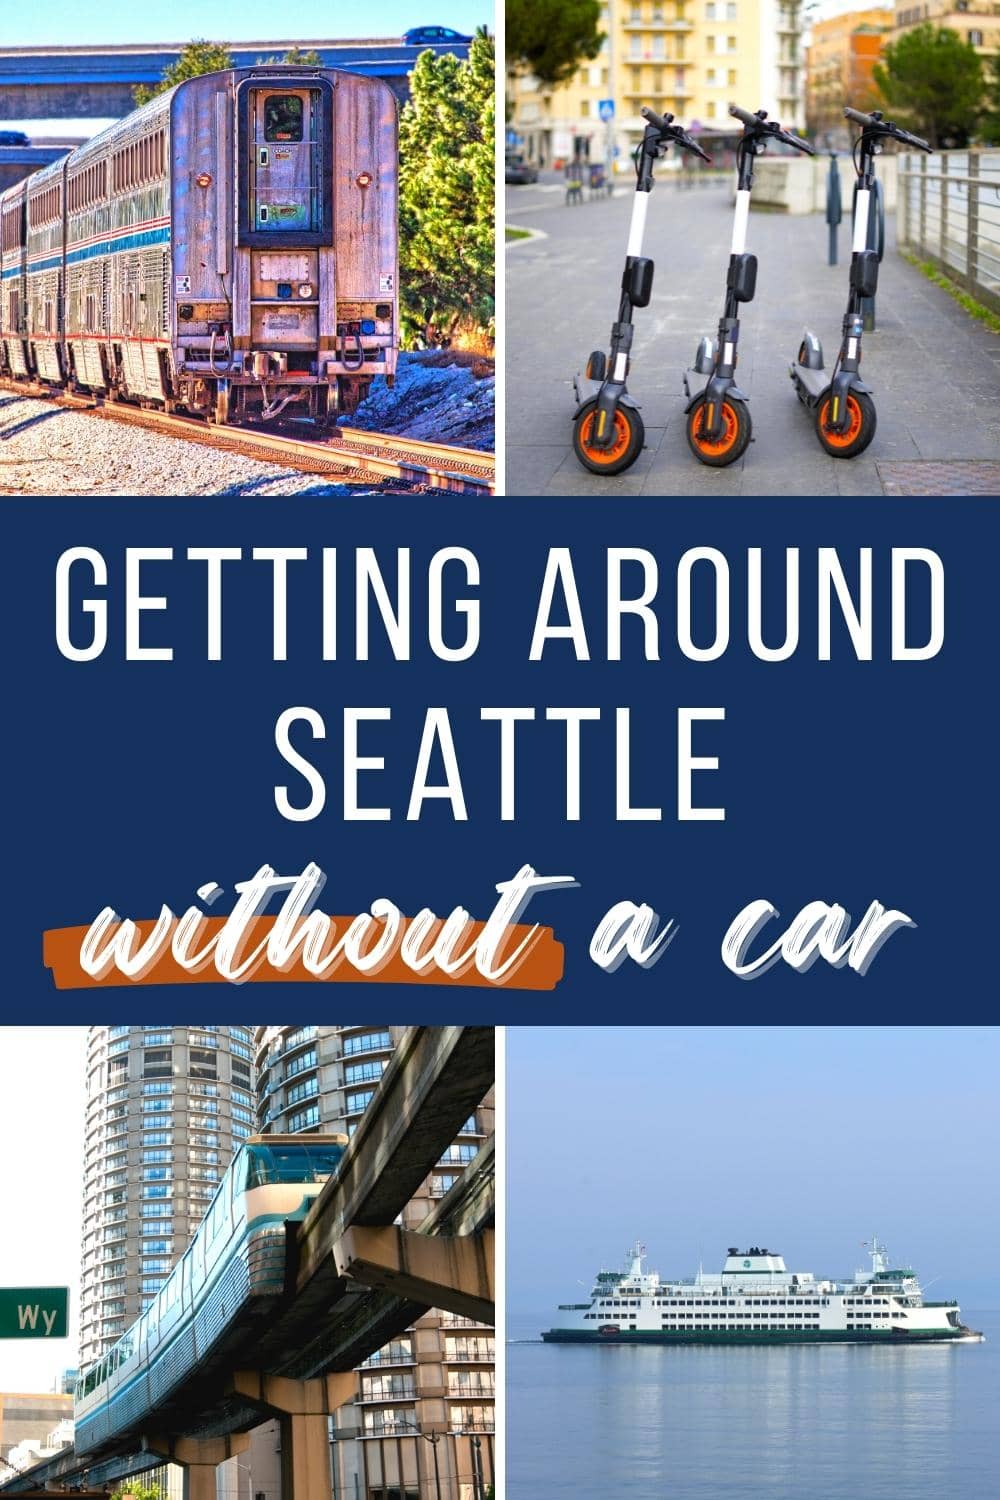 9 Ways for Getting Around Seattle without a Car (Easier Than You Think!)